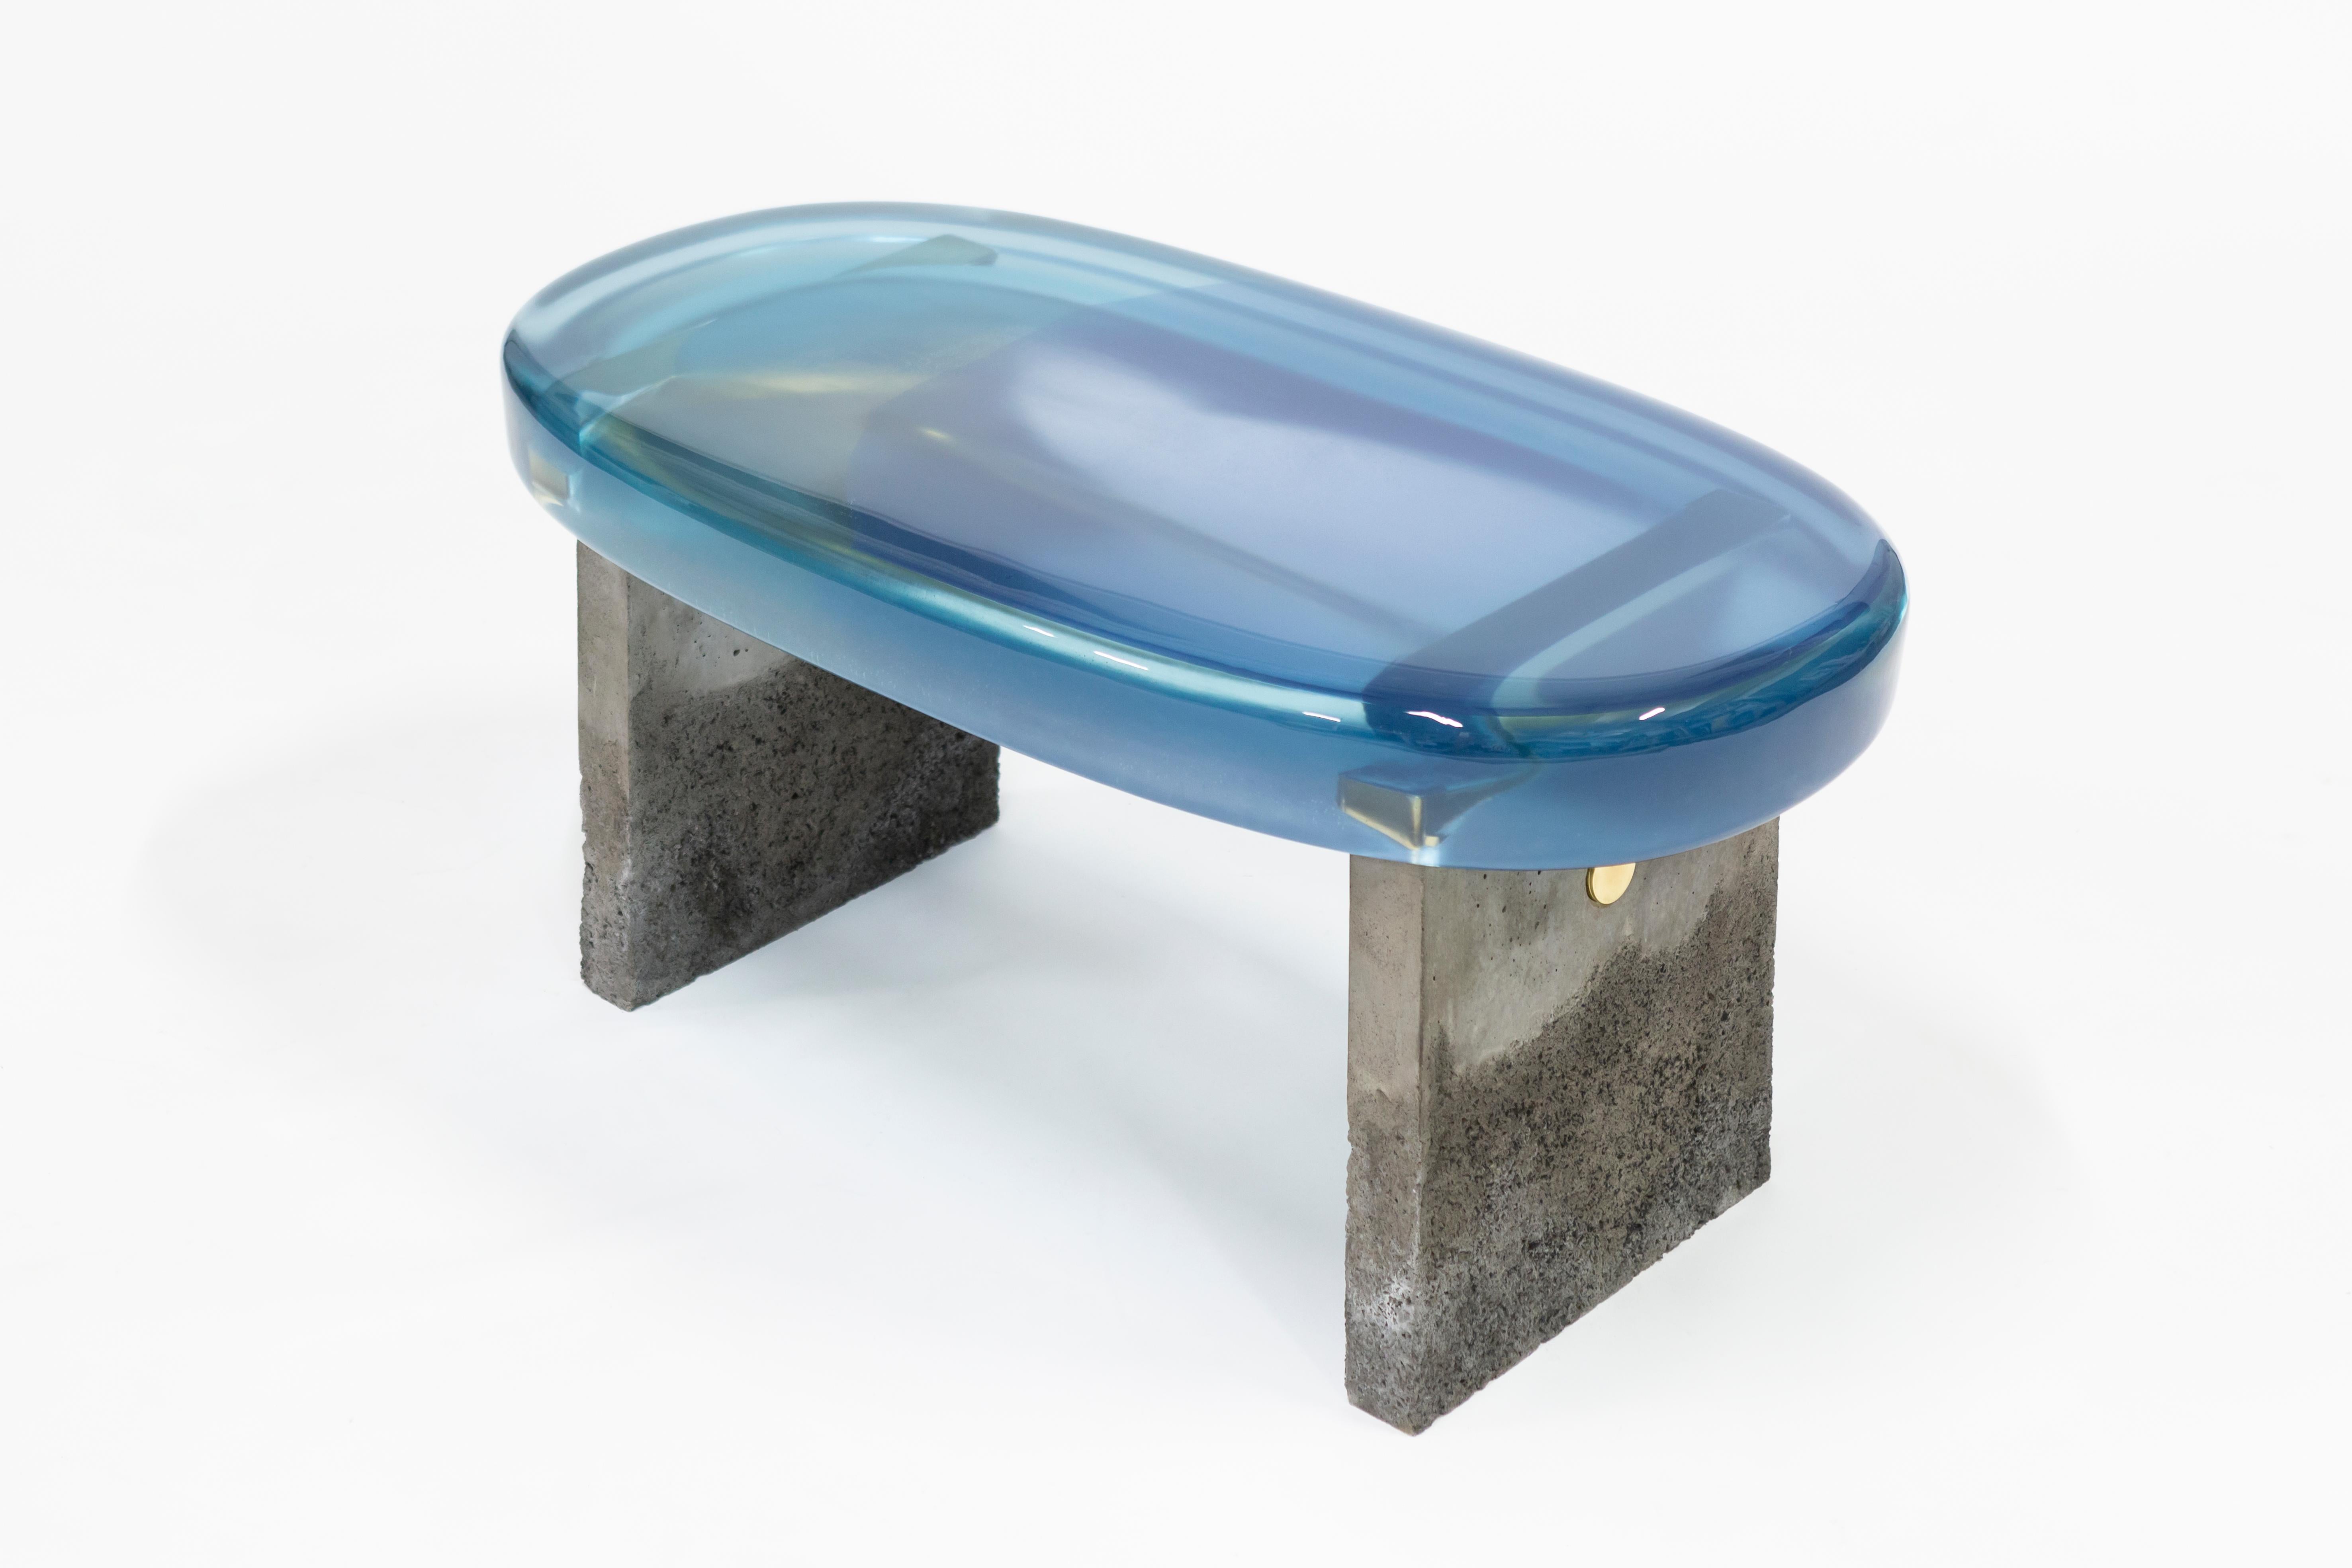 Golia bench by Draga & Aurel
Dimensions: W 67 x D 33 x H 44 cm
 top Ø 50 x 96 cm
Materials: Resin top, concrete

The Golia benches are featured by sculptural, almost monumental forms, and by
an unusual combination of material: The raw, solid